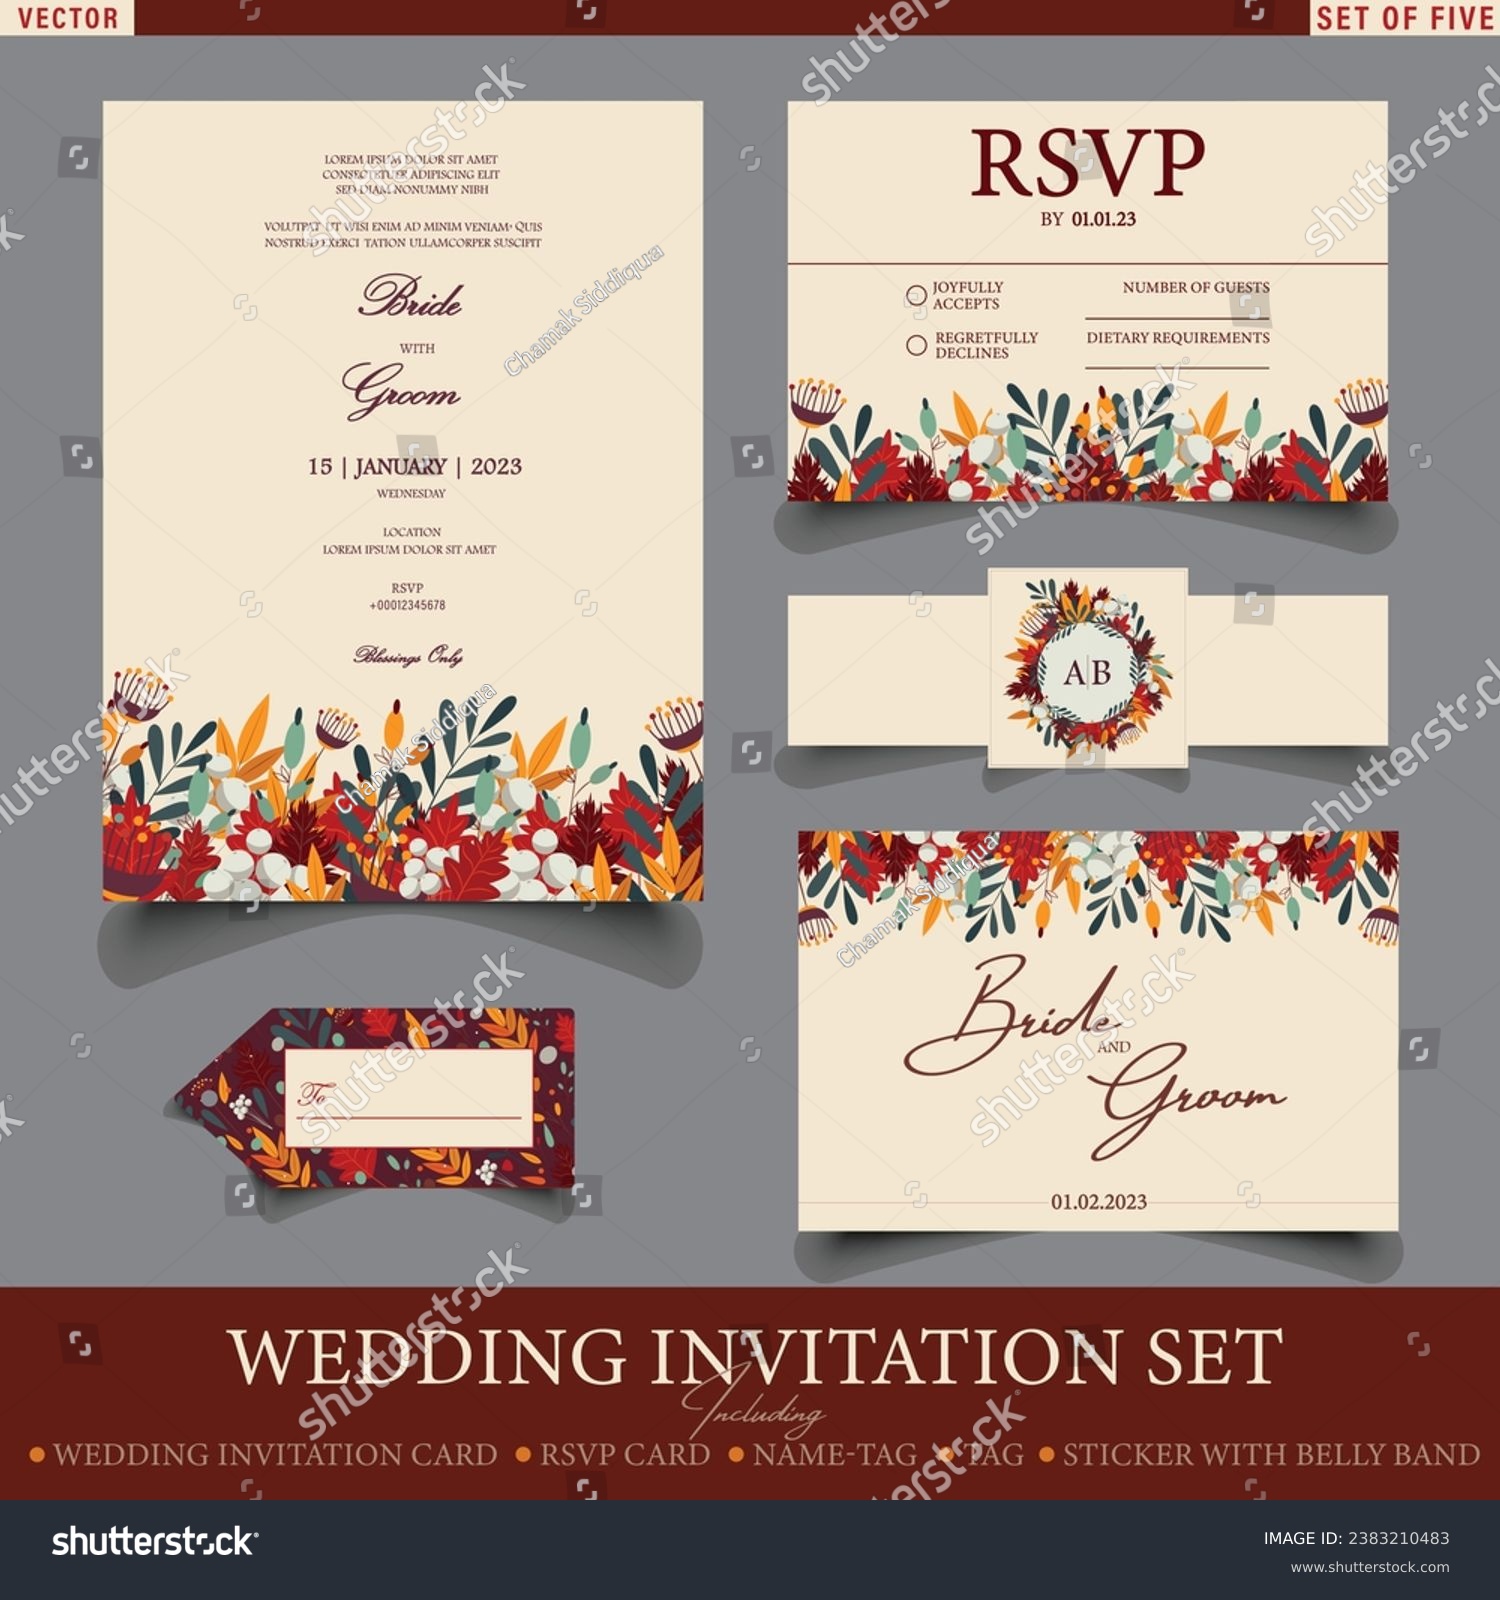 SVG of Modern Wedding Invitation set including Wedding Card, RSVP Card, Name-card, Thank you card, sticker with belly Band and Tag. Set of Five Invitation Card Templates in Fall colors with floral ornaments. svg